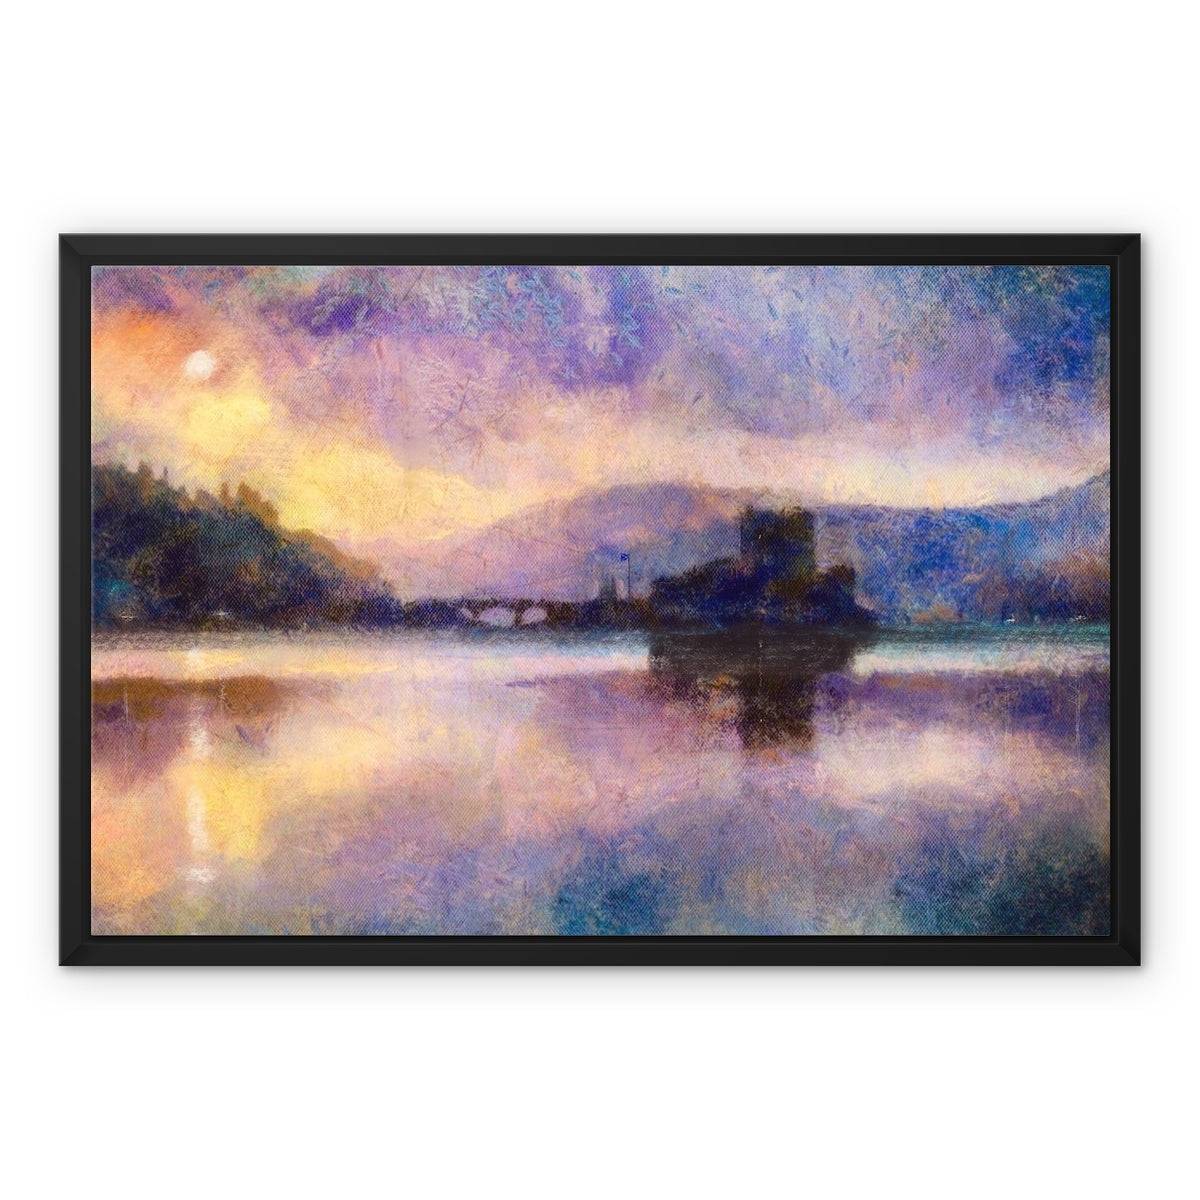 Eilean Donan Castle Moonlight Painting | Framed Canvas From Scotland-Floating Framed Canvas Prints-Historic & Iconic Scotland Art Gallery-24"x18"-Black Frame-Paintings, Prints, Homeware, Art Gifts From Scotland By Scottish Artist Kevin Hunter